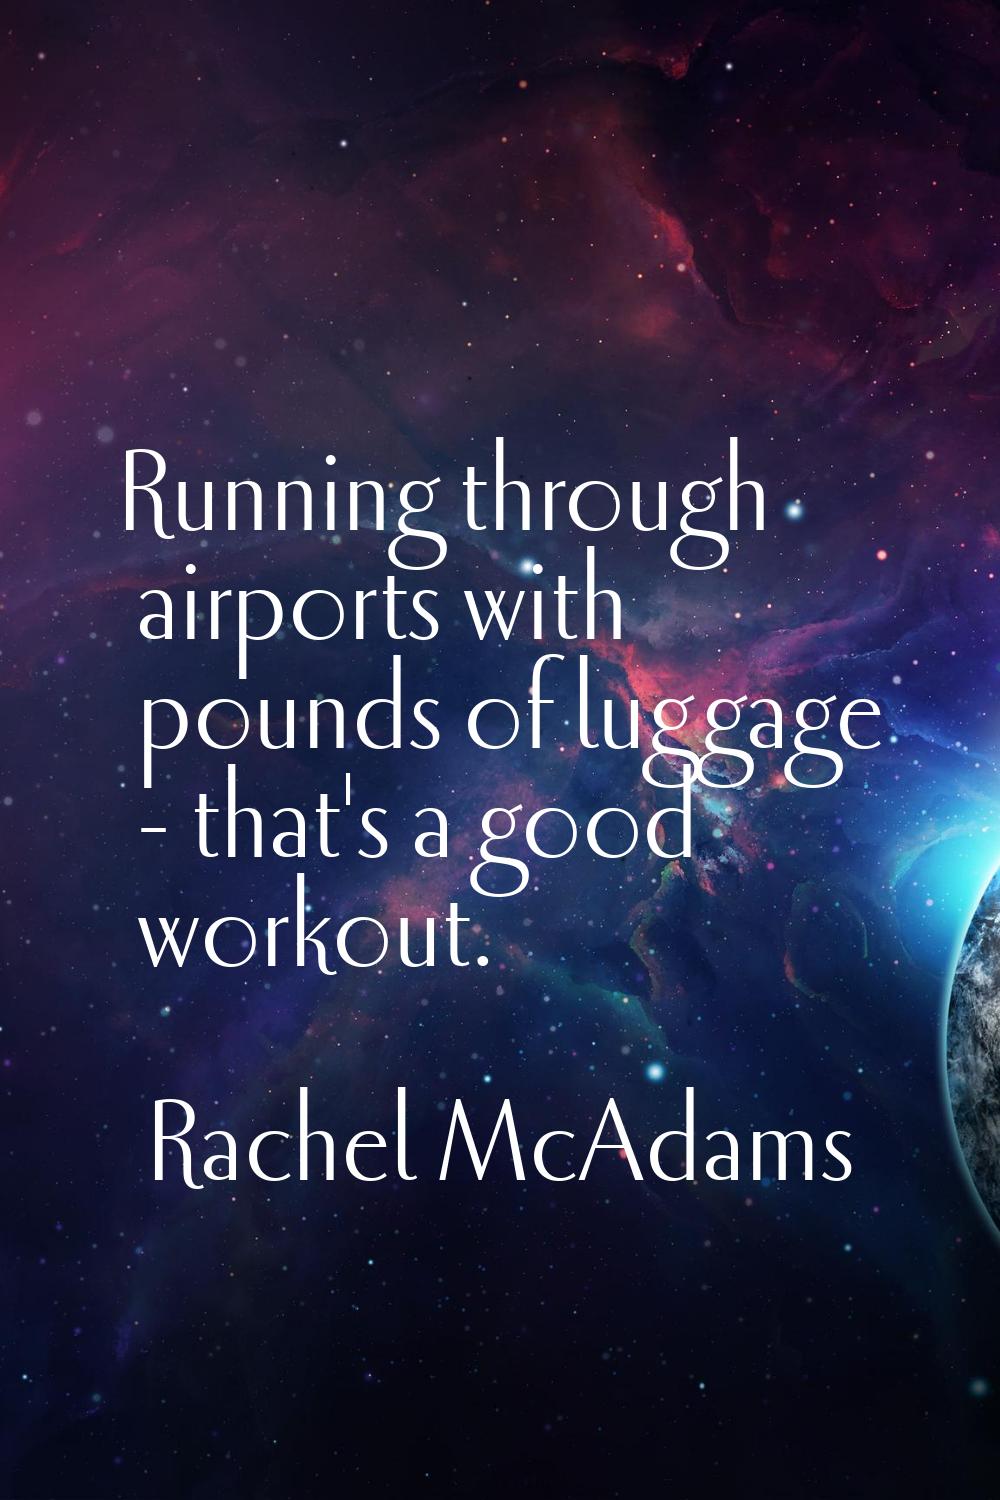 Running through airports with pounds of luggage - that's a good workout.